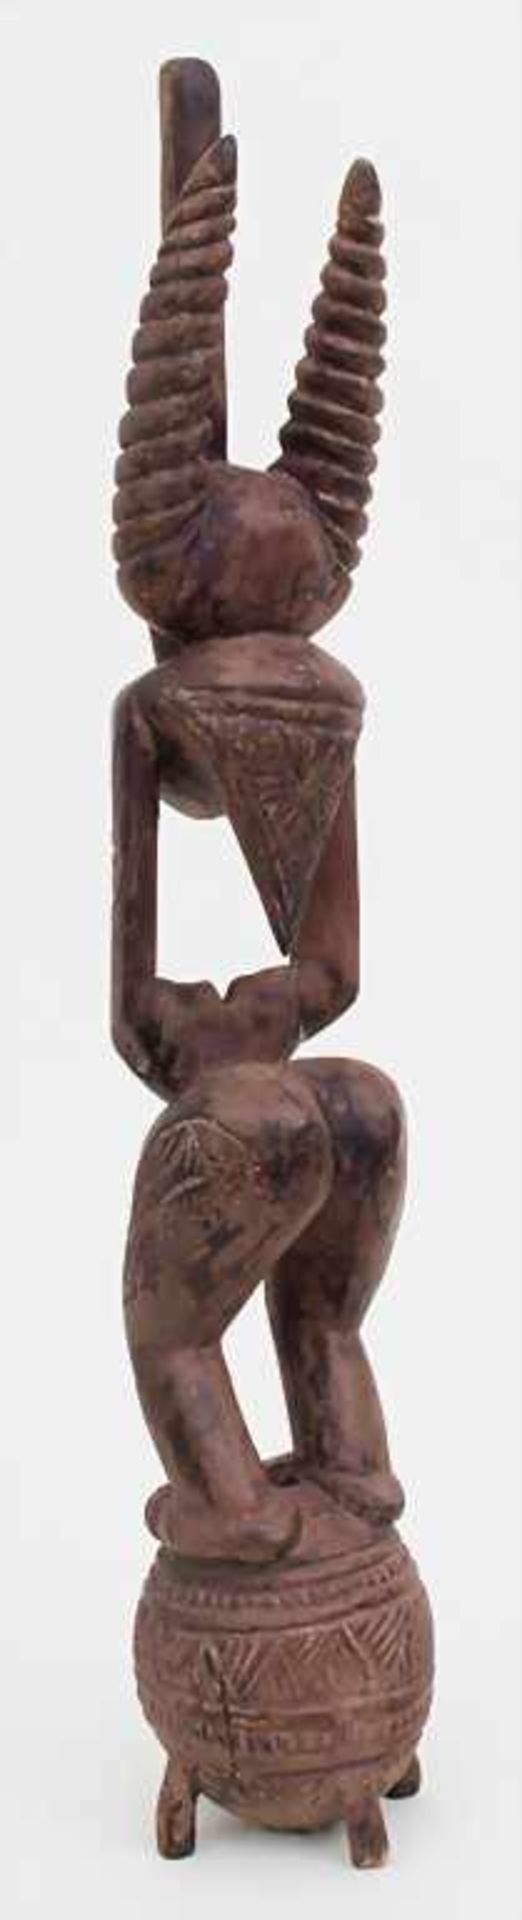 Männliche Figur / A male figure, Igala, NigeriaMaterial: Holz, rotbraune Patina,Höhe: 57 cm, - Image 2 of 4